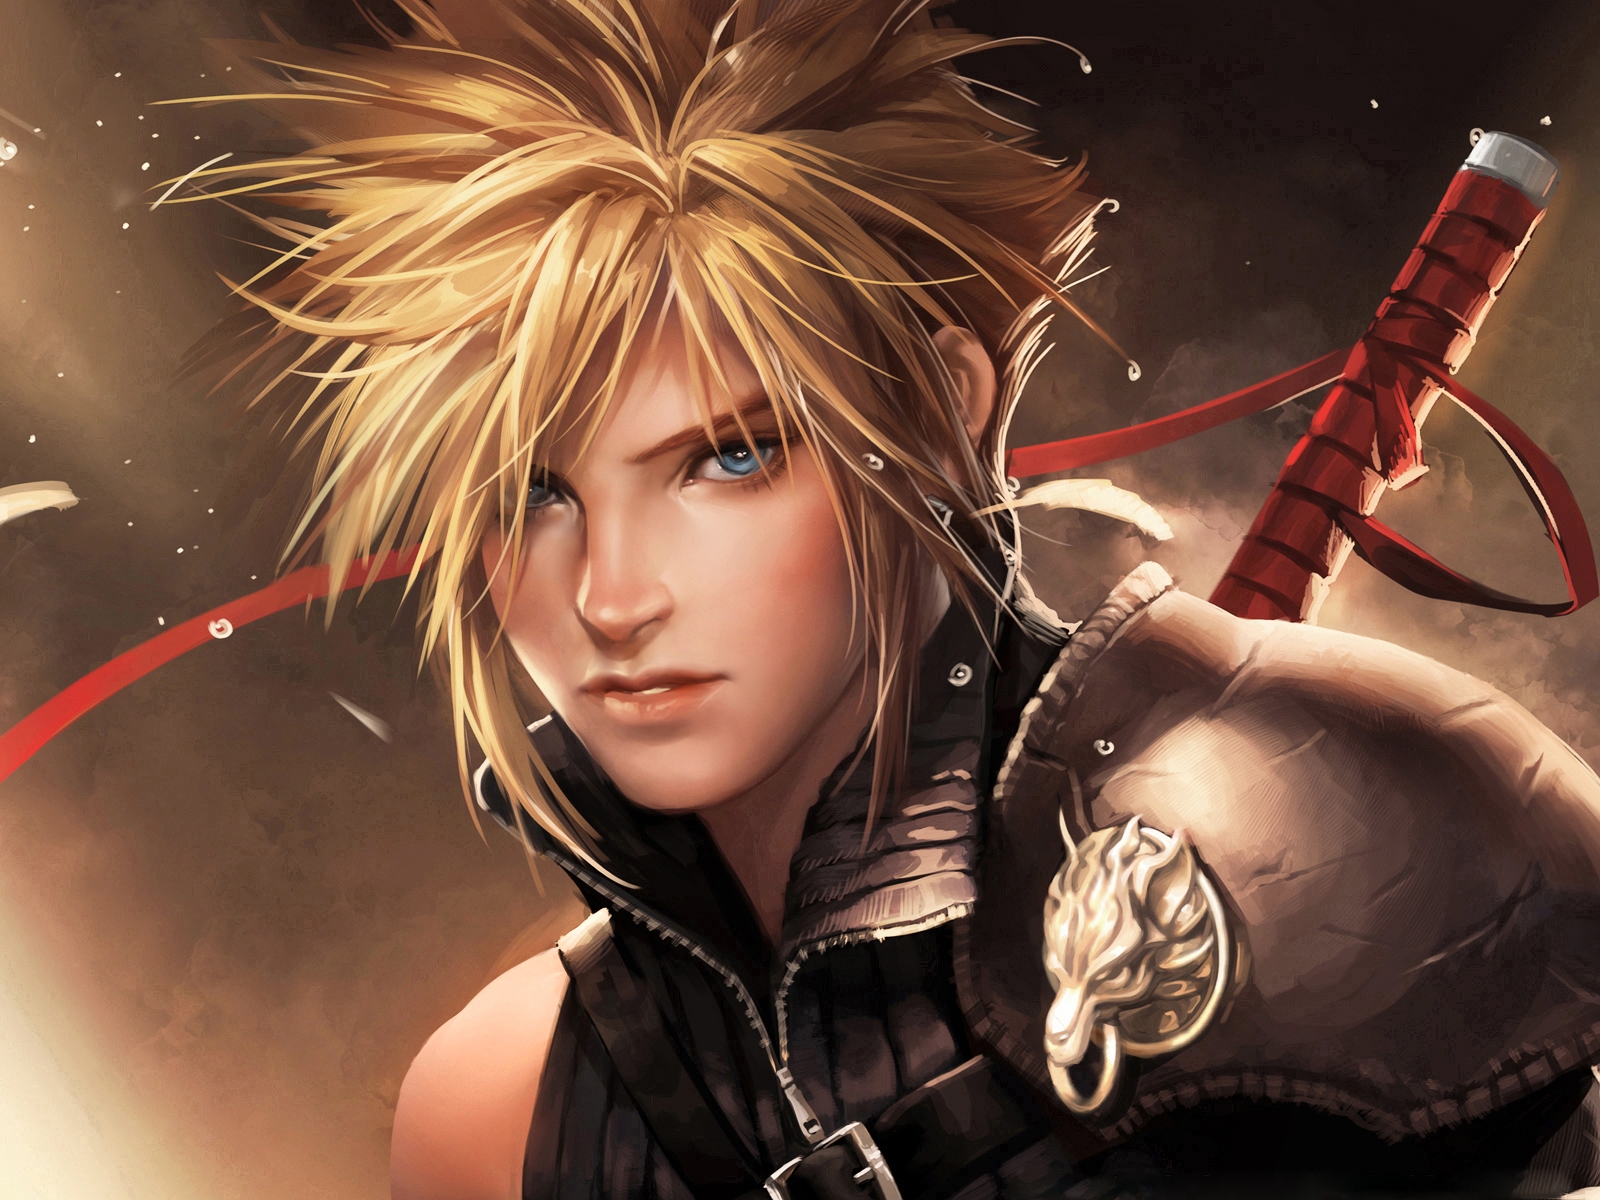 Final Fantasy Soldier for 1600 x 1200 resolution